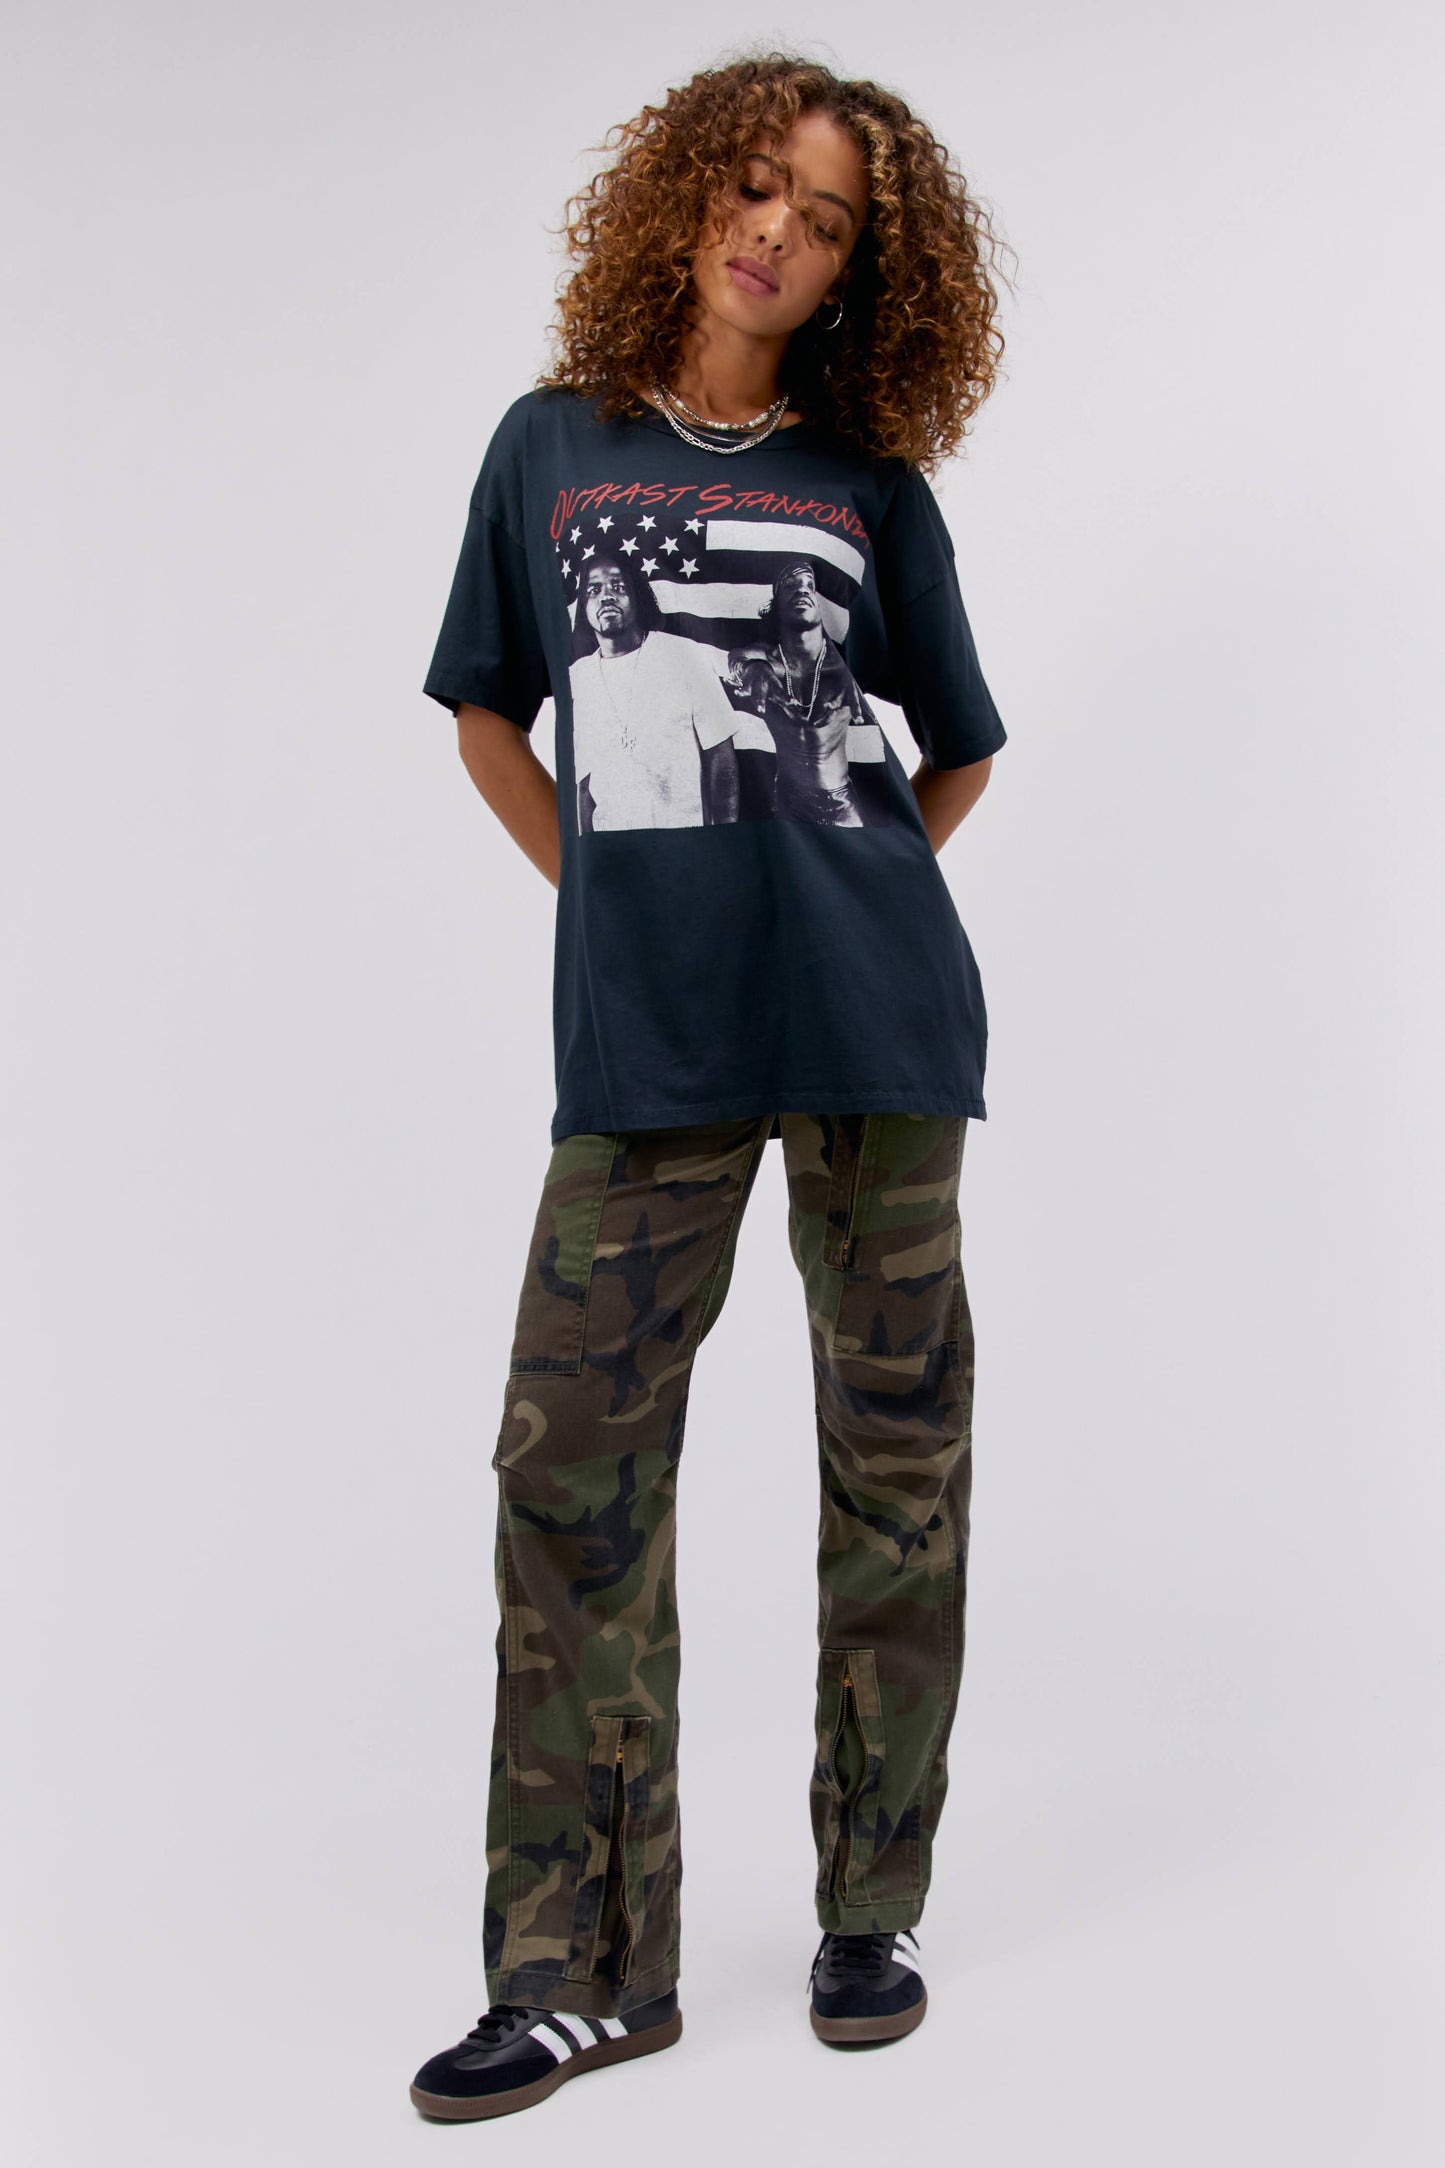 A curly-haired model featuring a black tee stamped with the duo's name and album 'Outkast Stankonia', along with a portrait of the artists in front of an American flag in black and white.